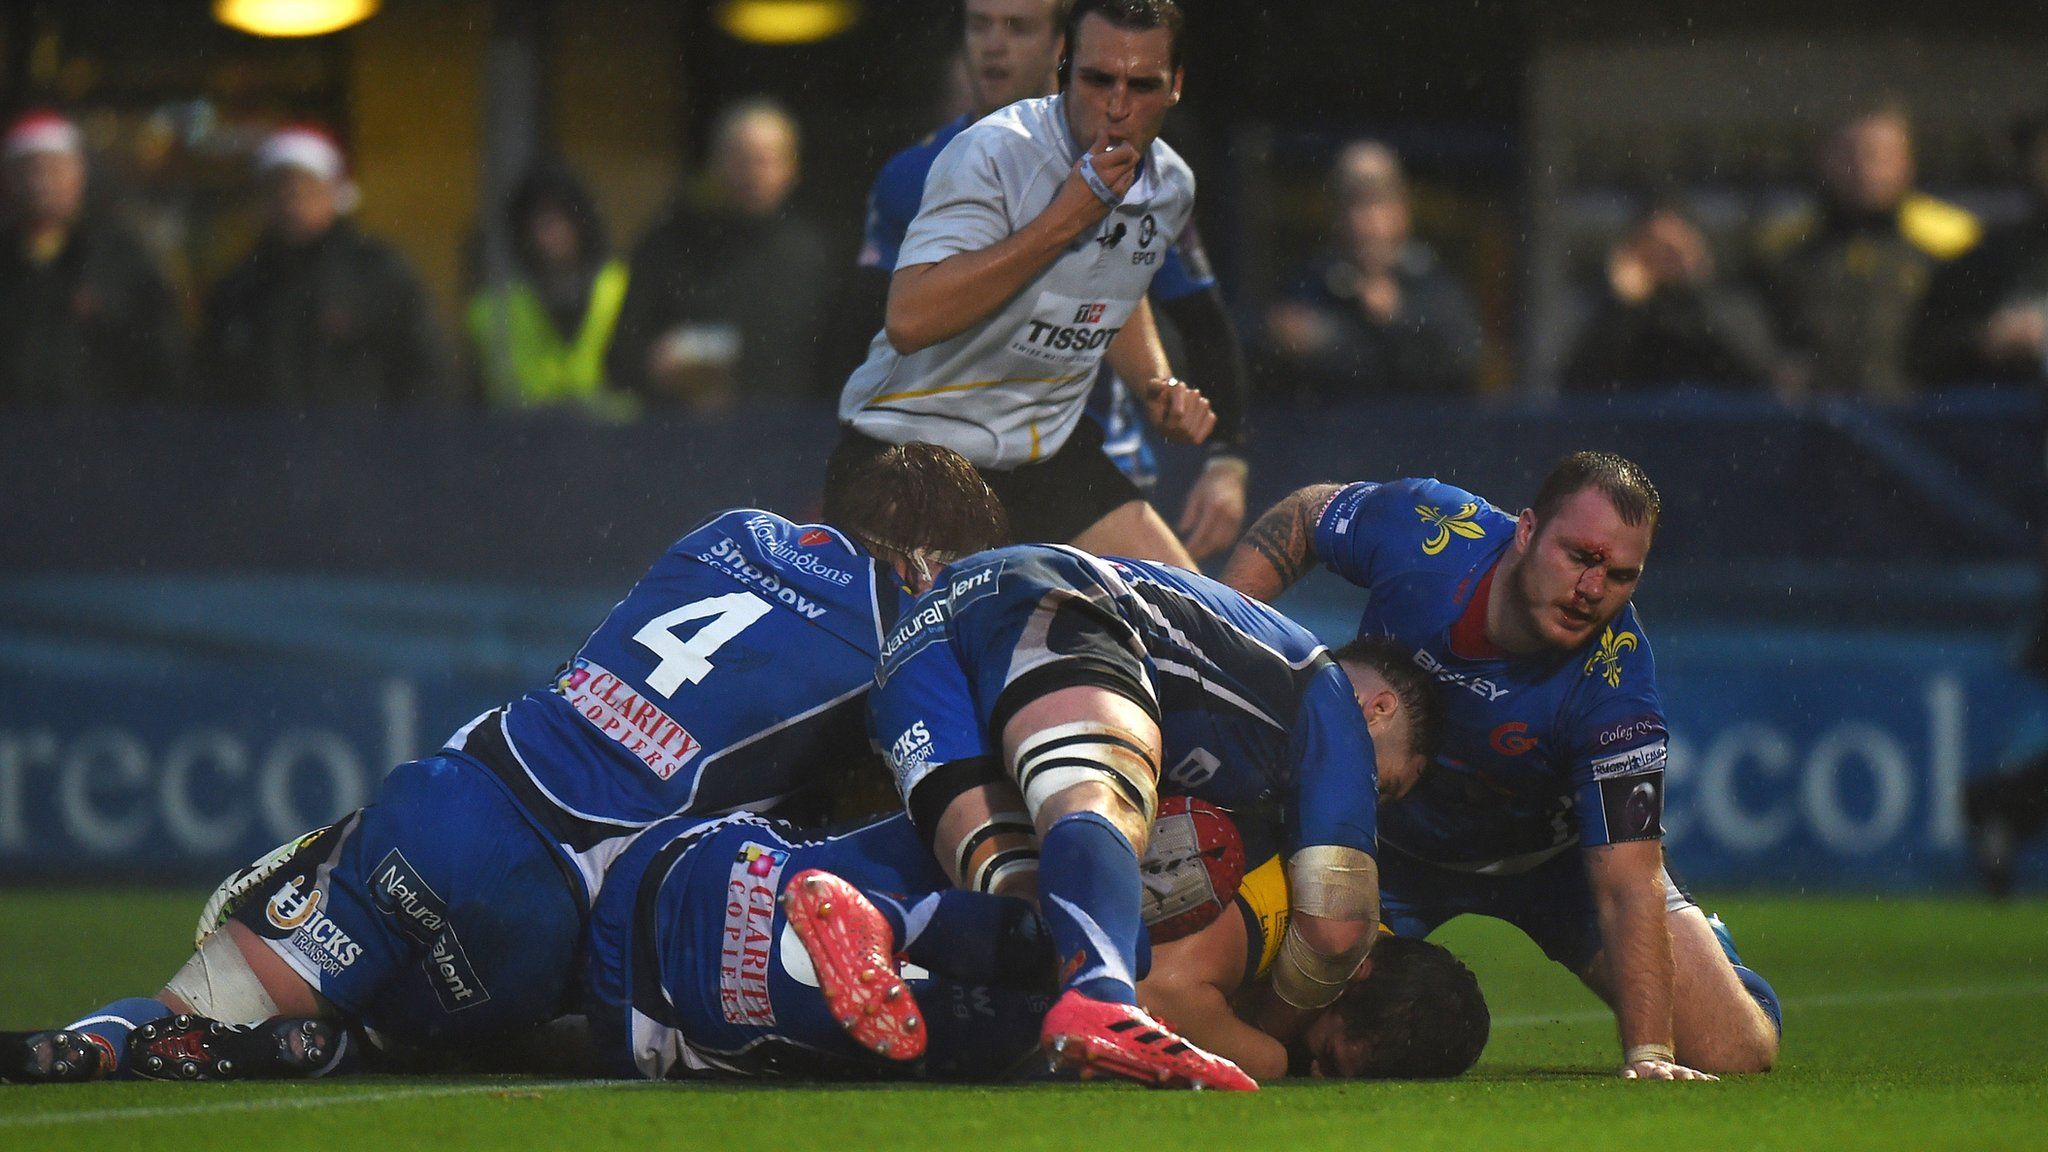 Worcester prop Val Rapava Ruskin dived over for Warriors' first try to turn the contest in the final minute of the first half